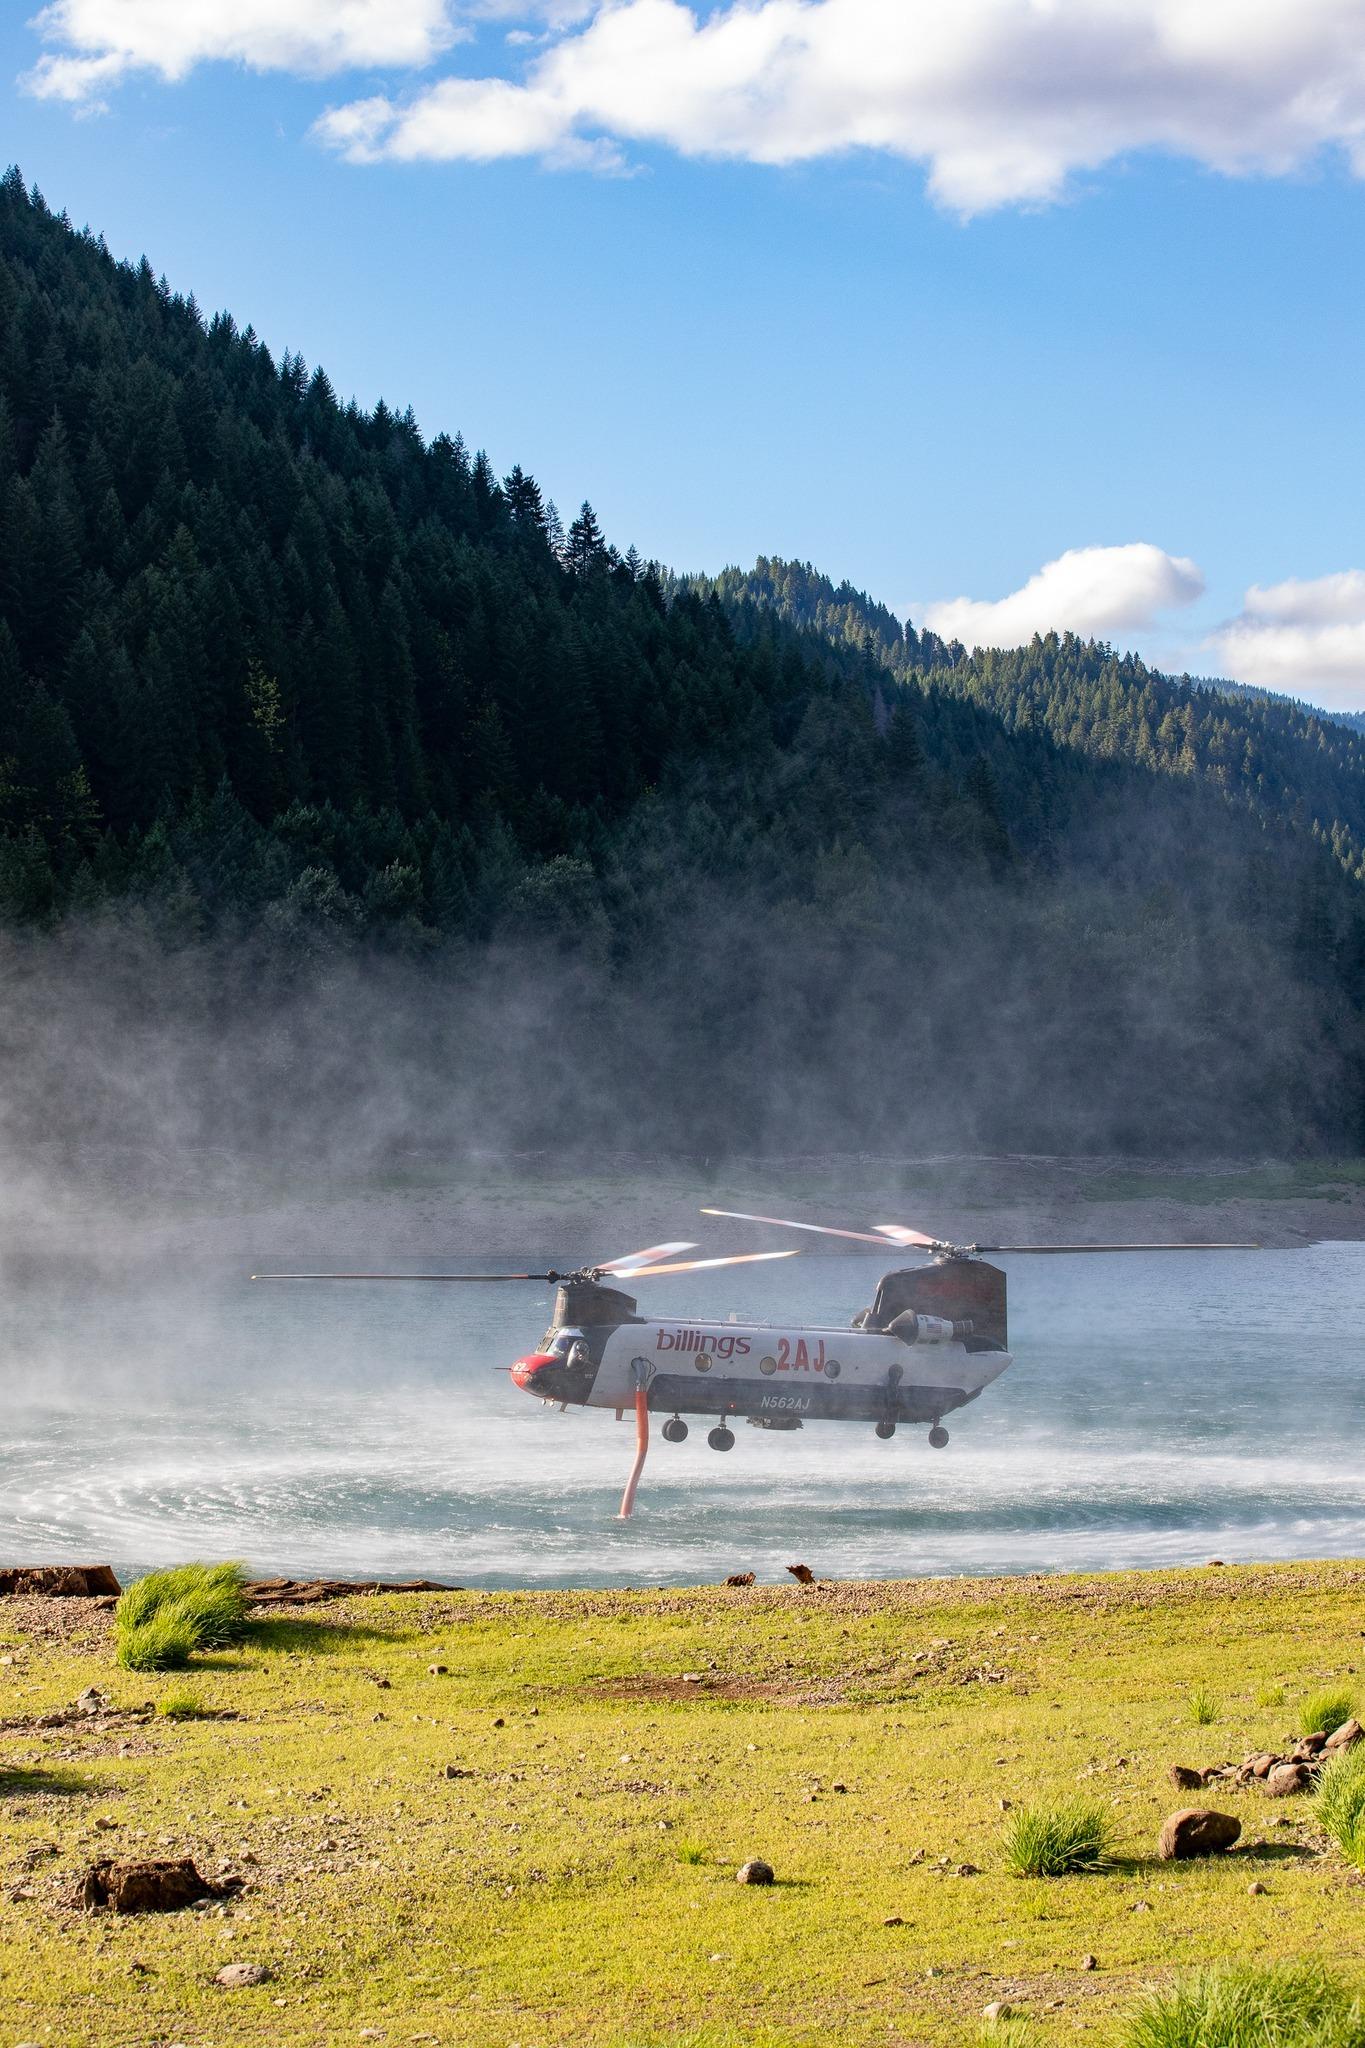 This is an image of a Type 1 helicopter hovering over the Lake and filling up with water